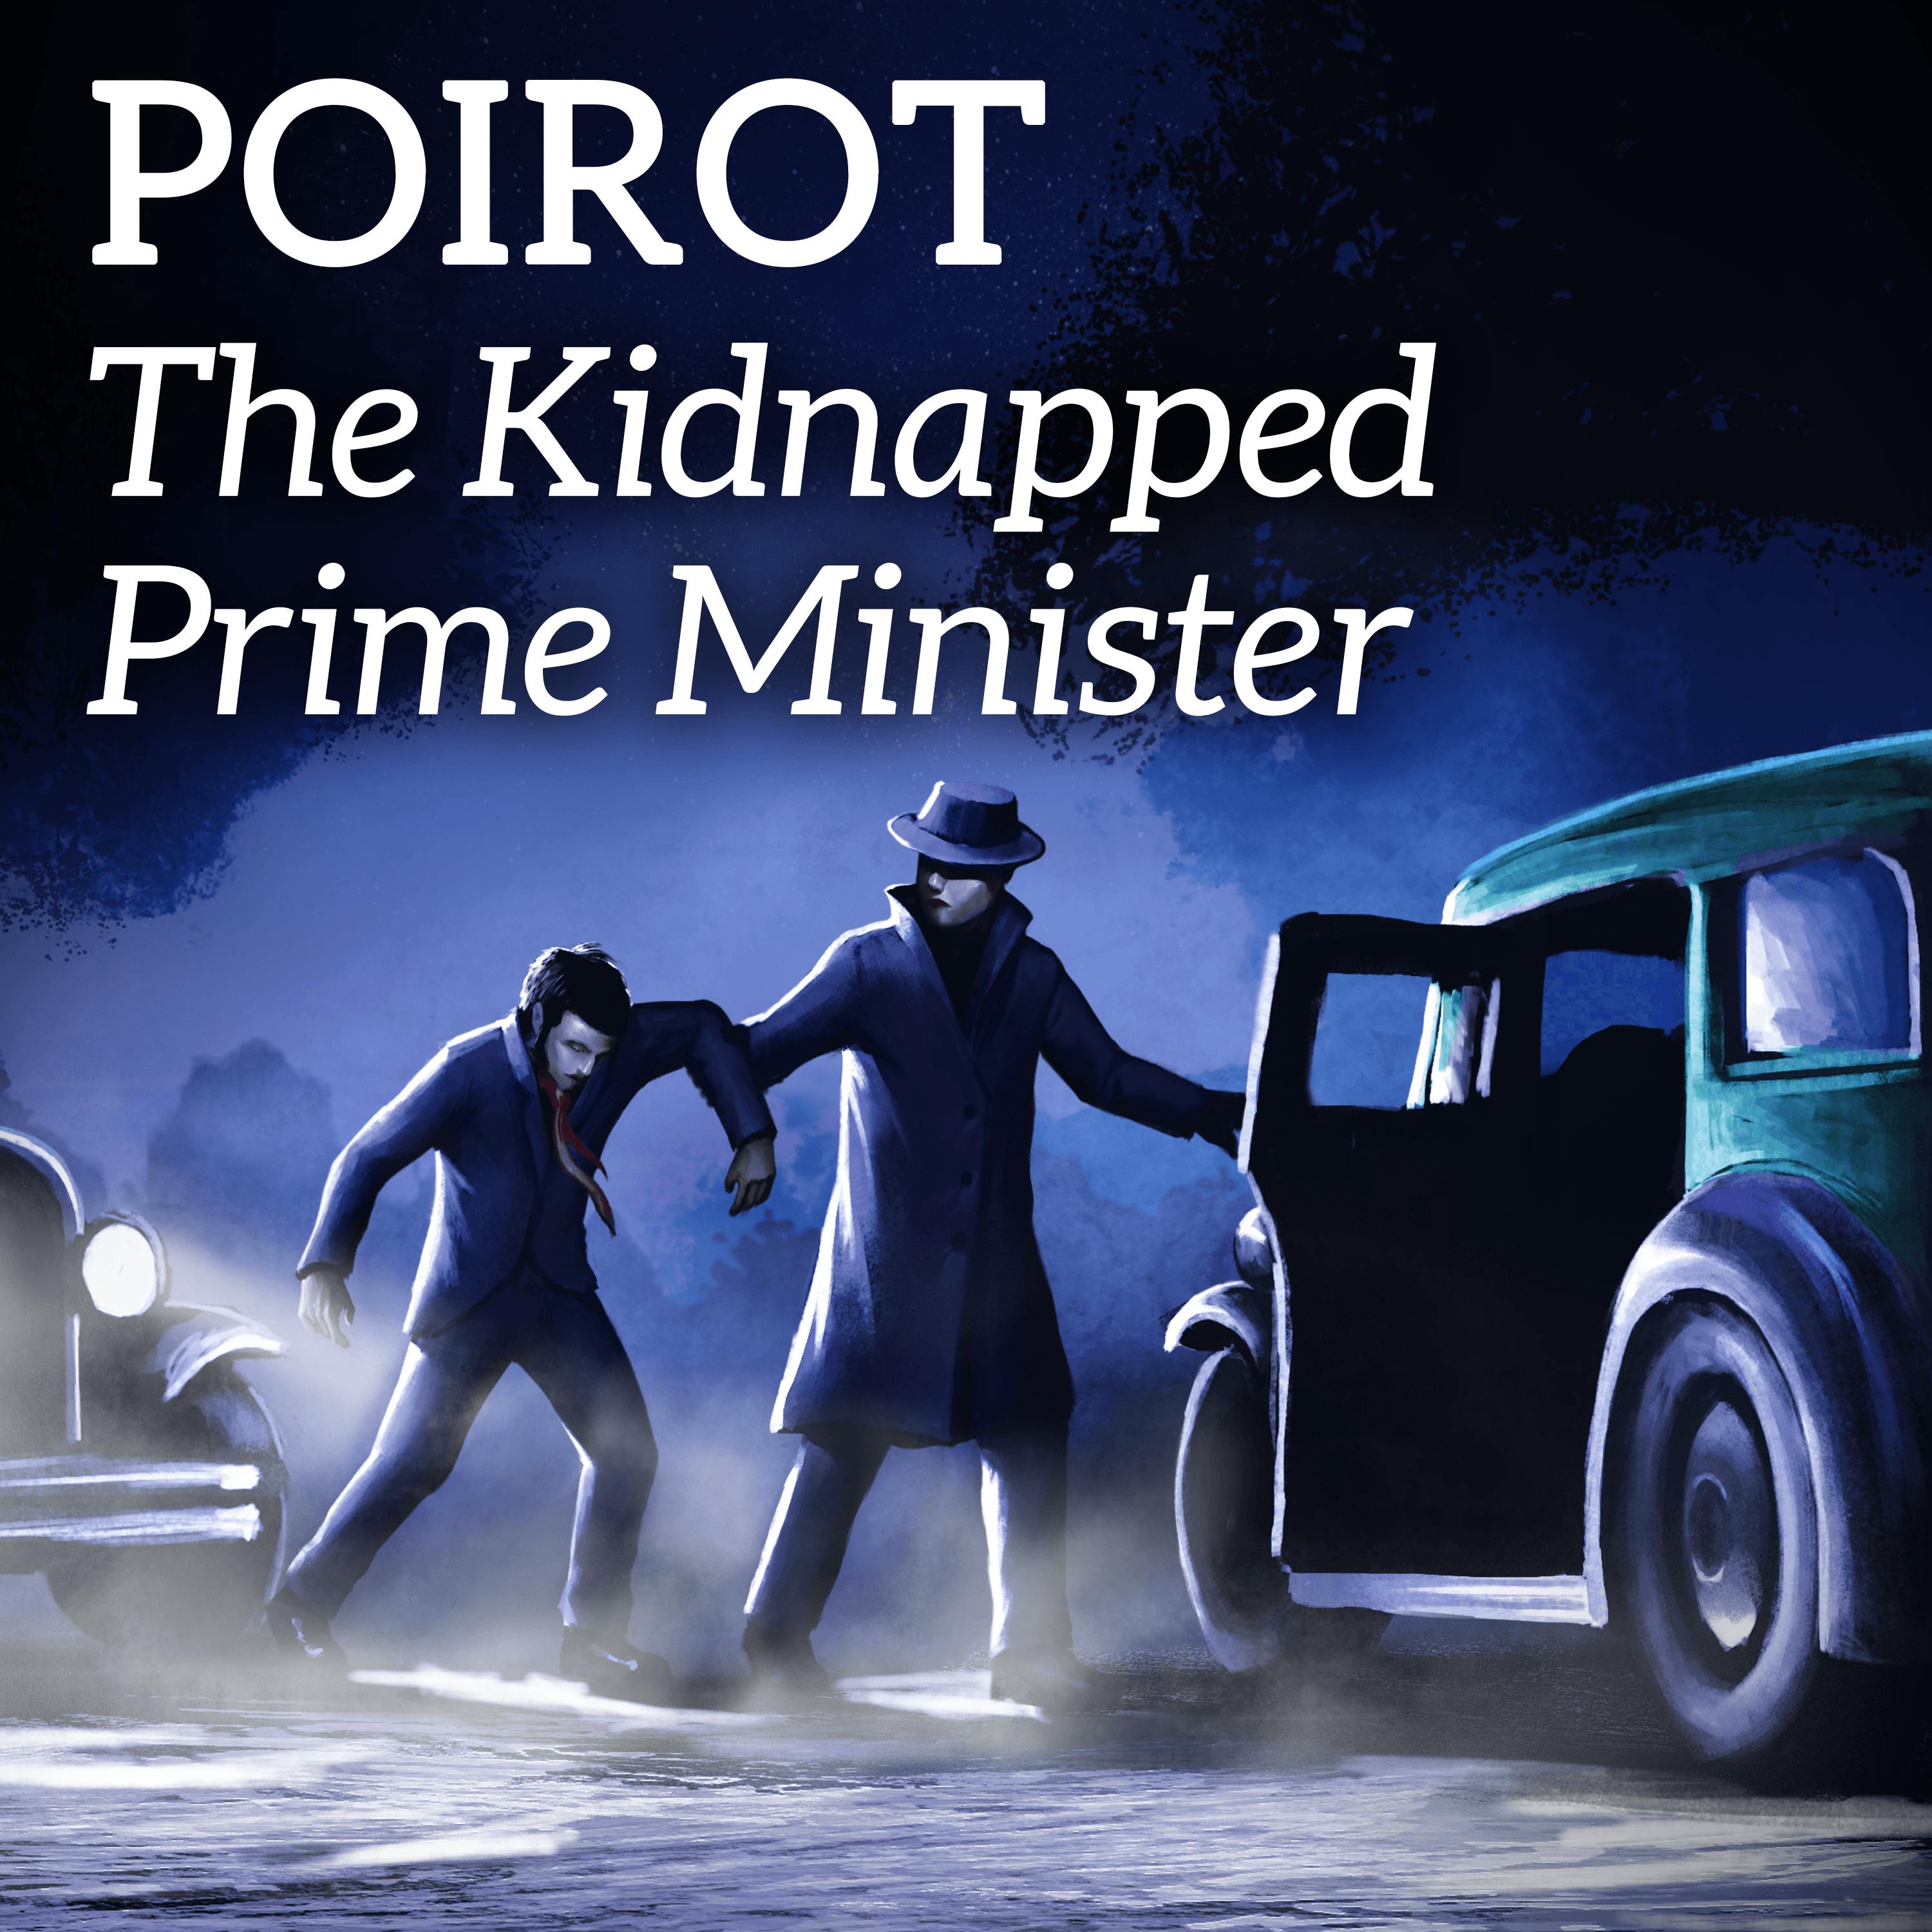 A Short Story Mystery - Poirot and The Kidnapped Prime Minister